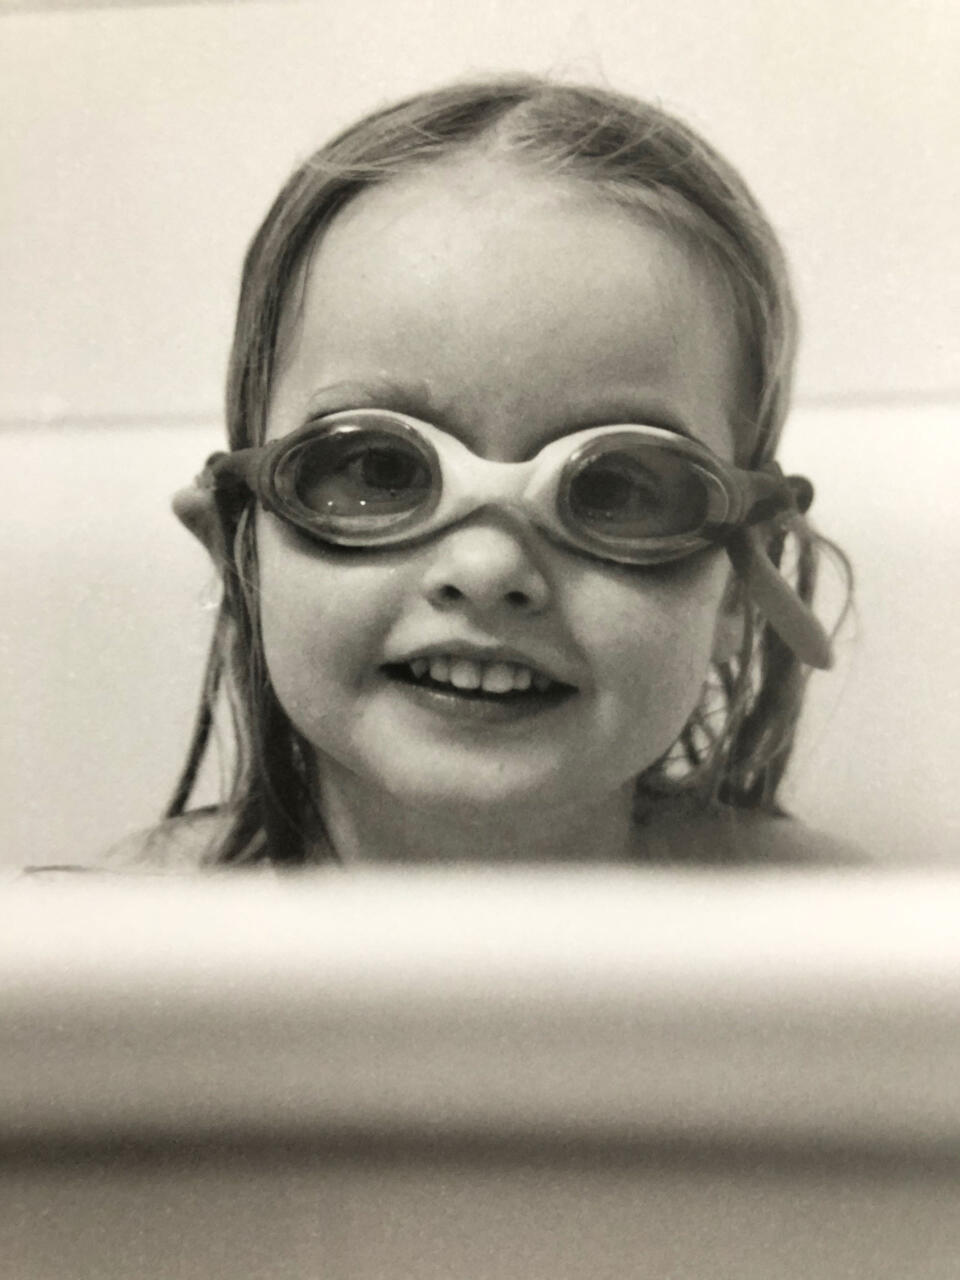 Crop of Zoe (3) in the bathtub, with swimming goggles on.